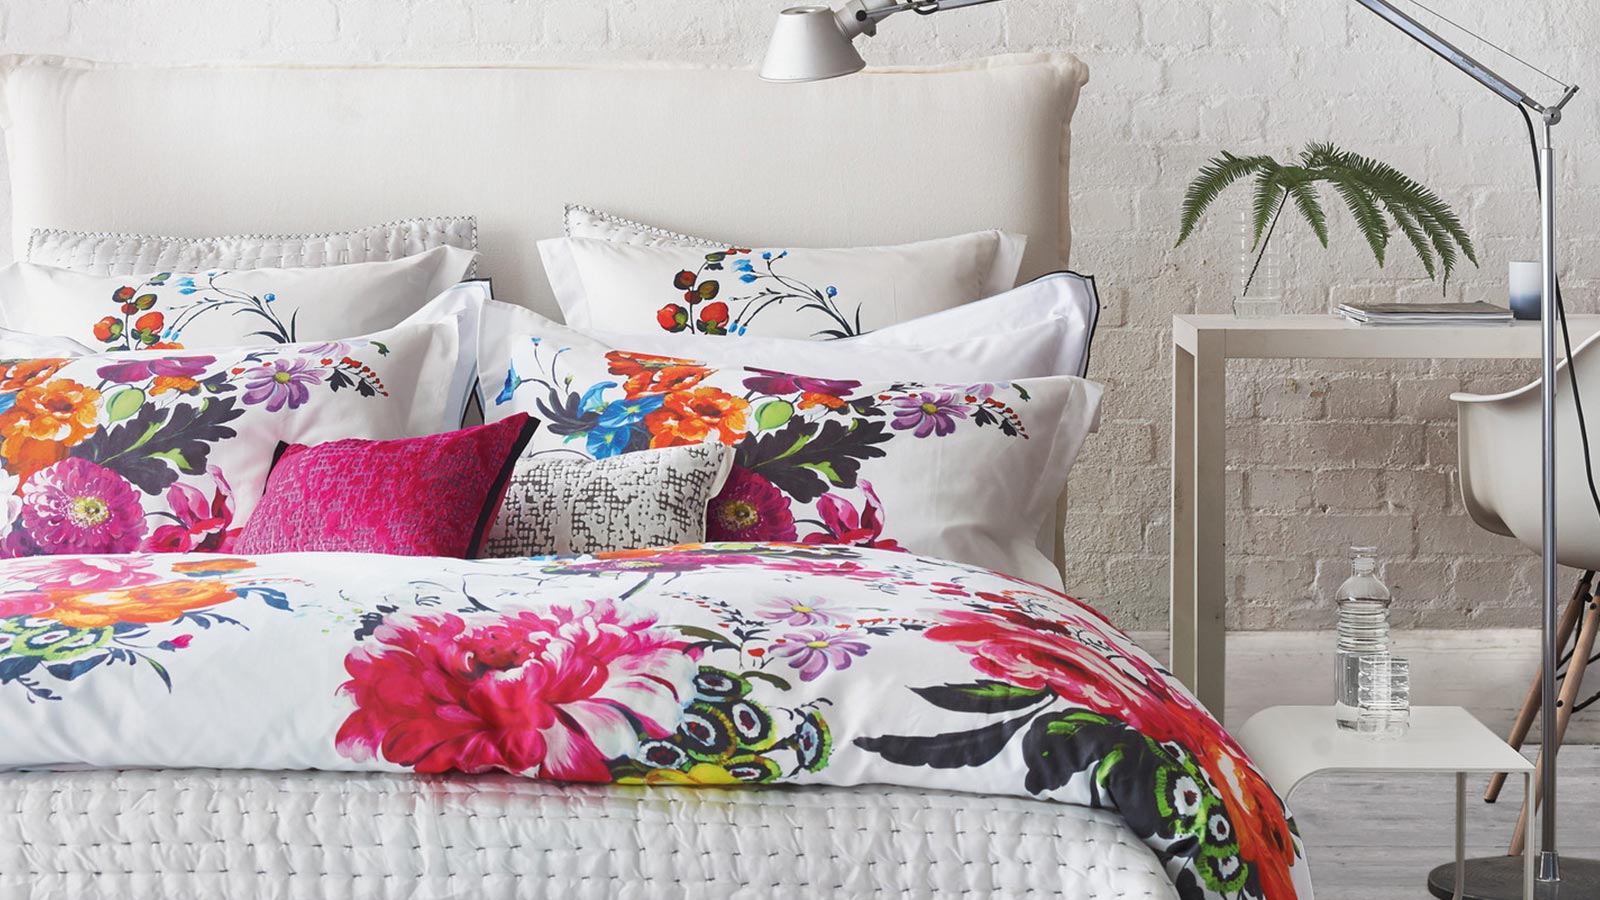 10 beautiful bedding sets to update bedroom for summer